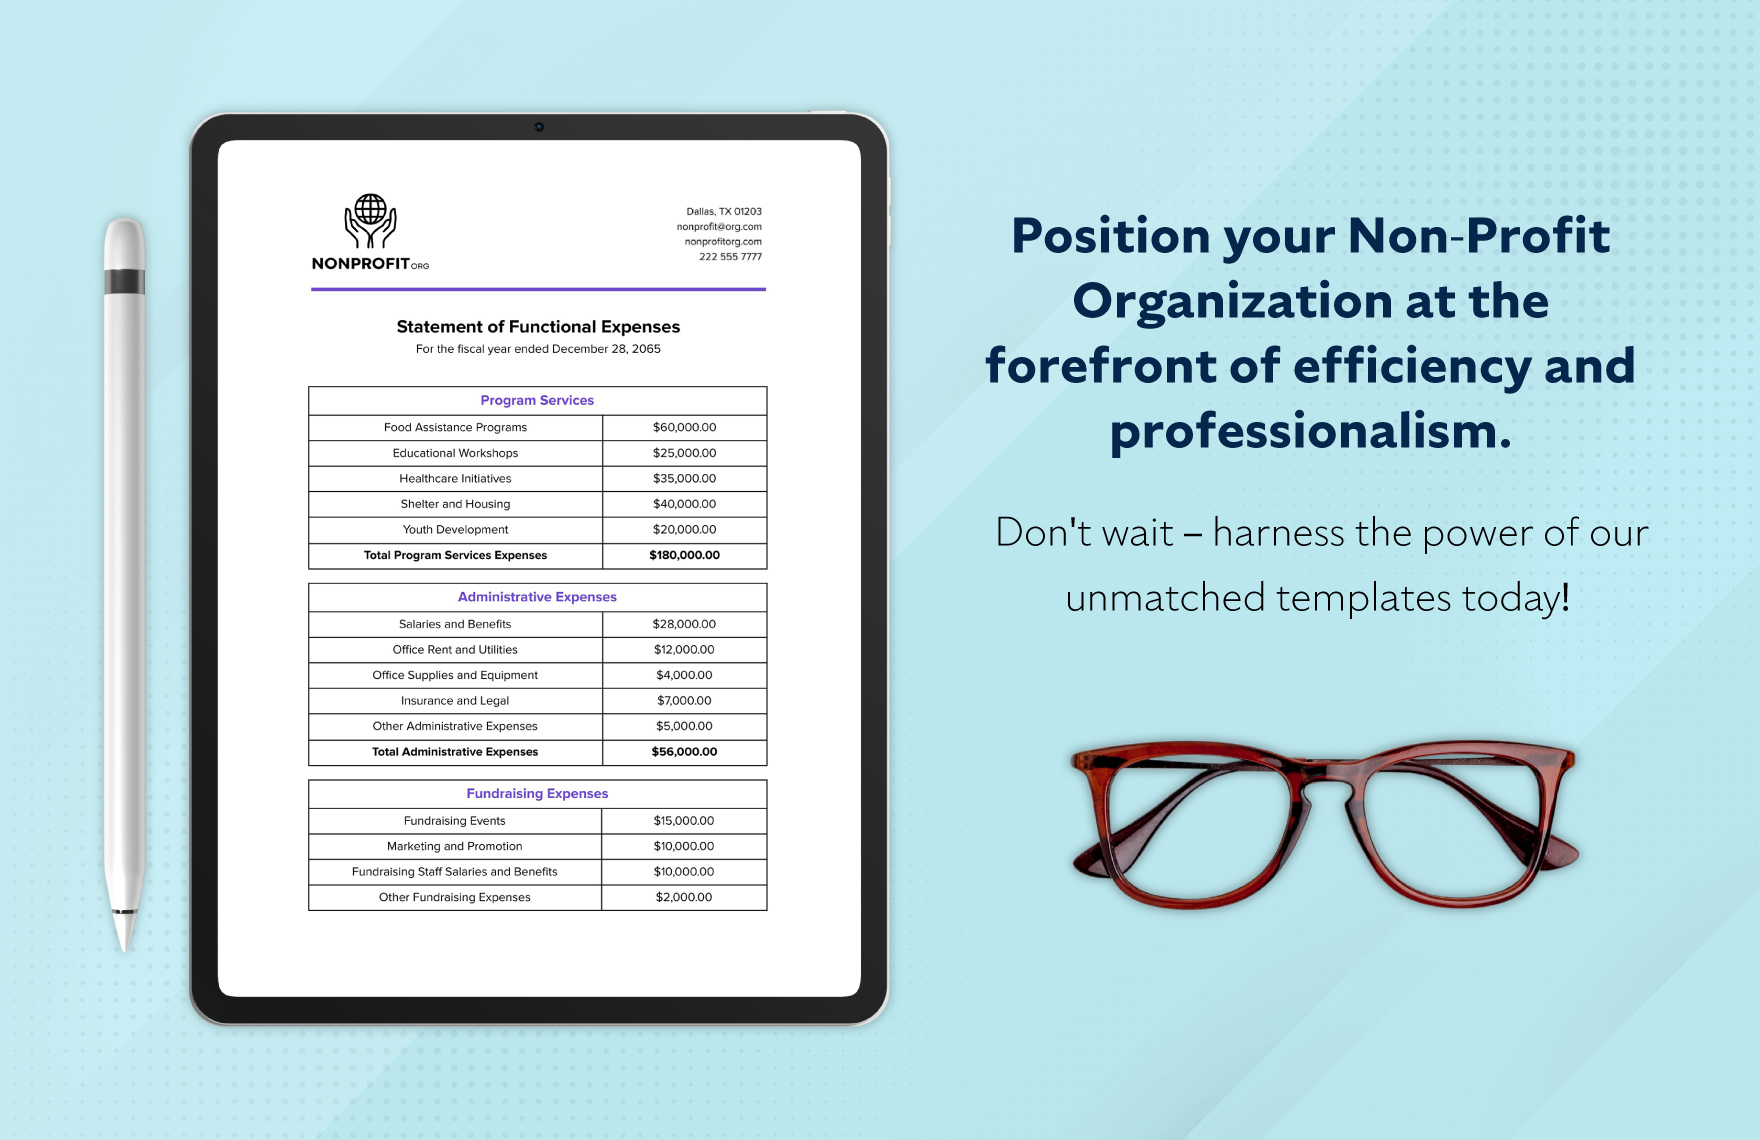 Nonprofit Organization Statement of Functional Expenses Template